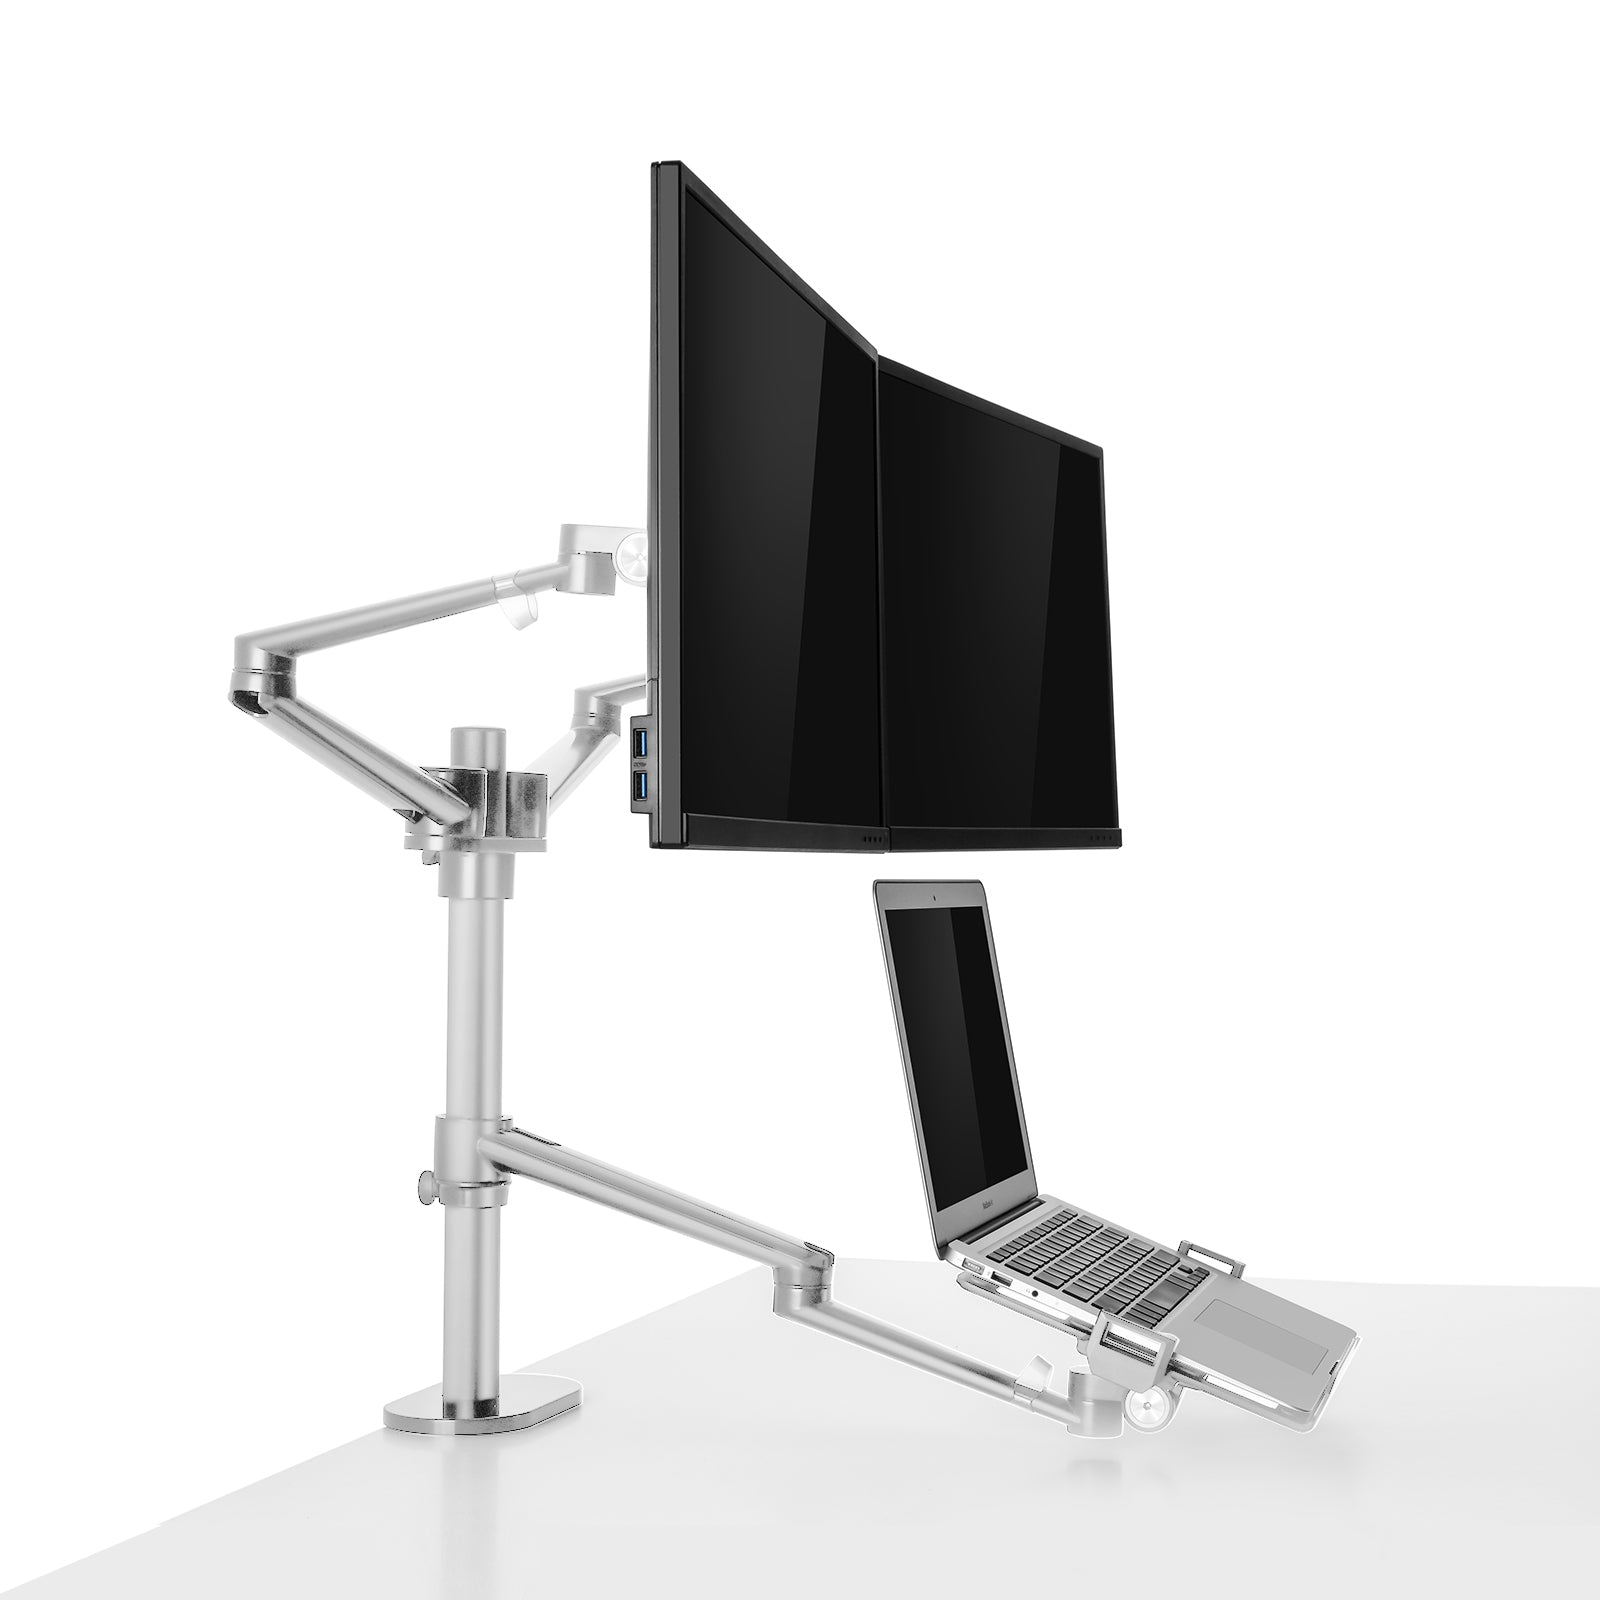 Aeons Dual Monitor and Laptop Tray Desk Mount, 3-in-1 Adjustable Triple Arm fits 27 inch Screen with VESA, Clamp and Cable Management, Silver